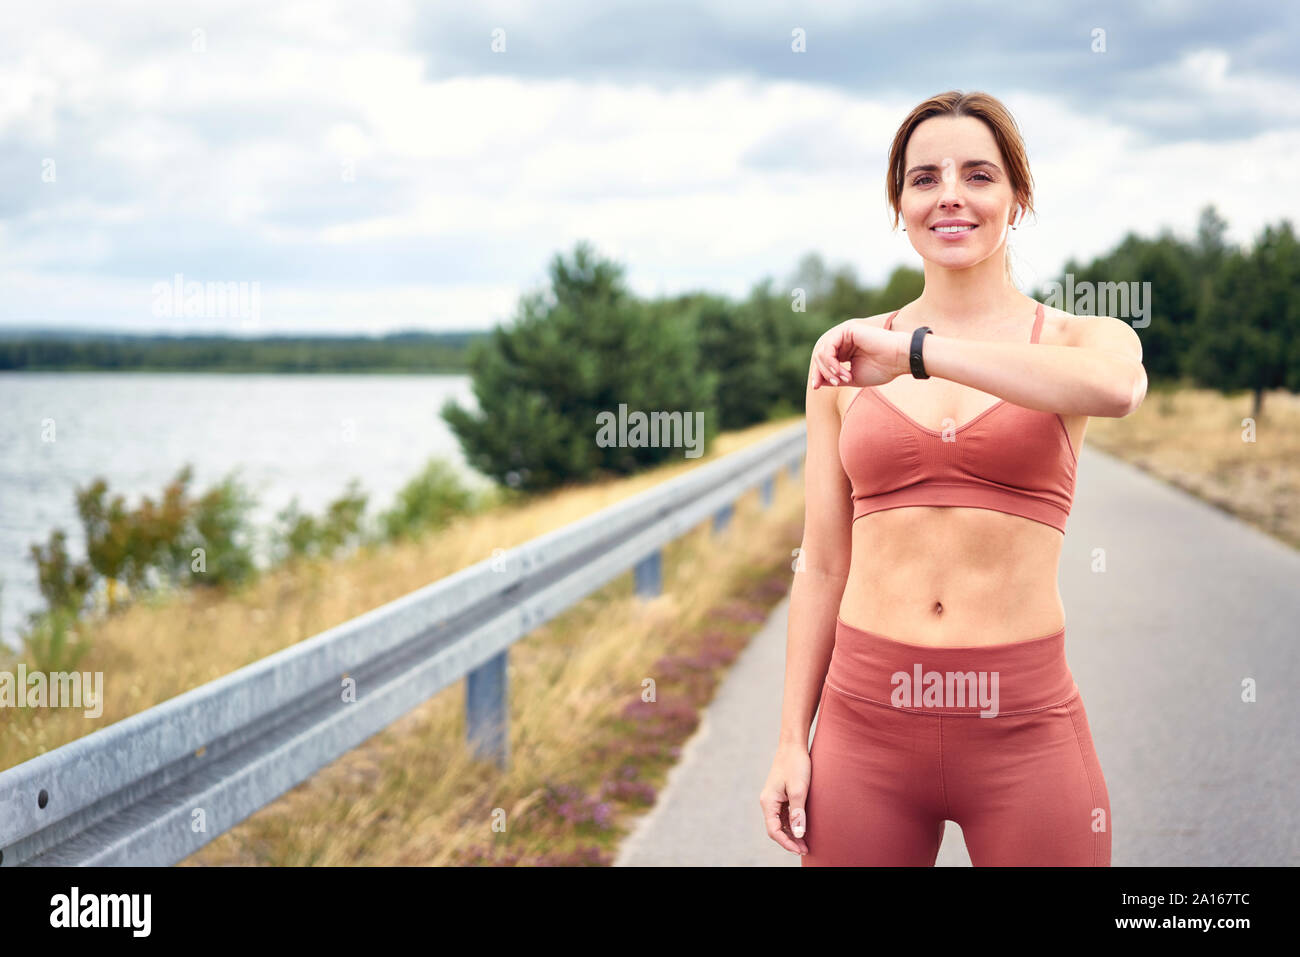 Portrait of fit woman checking smartwatch during outdoor jogging session Stock Photo